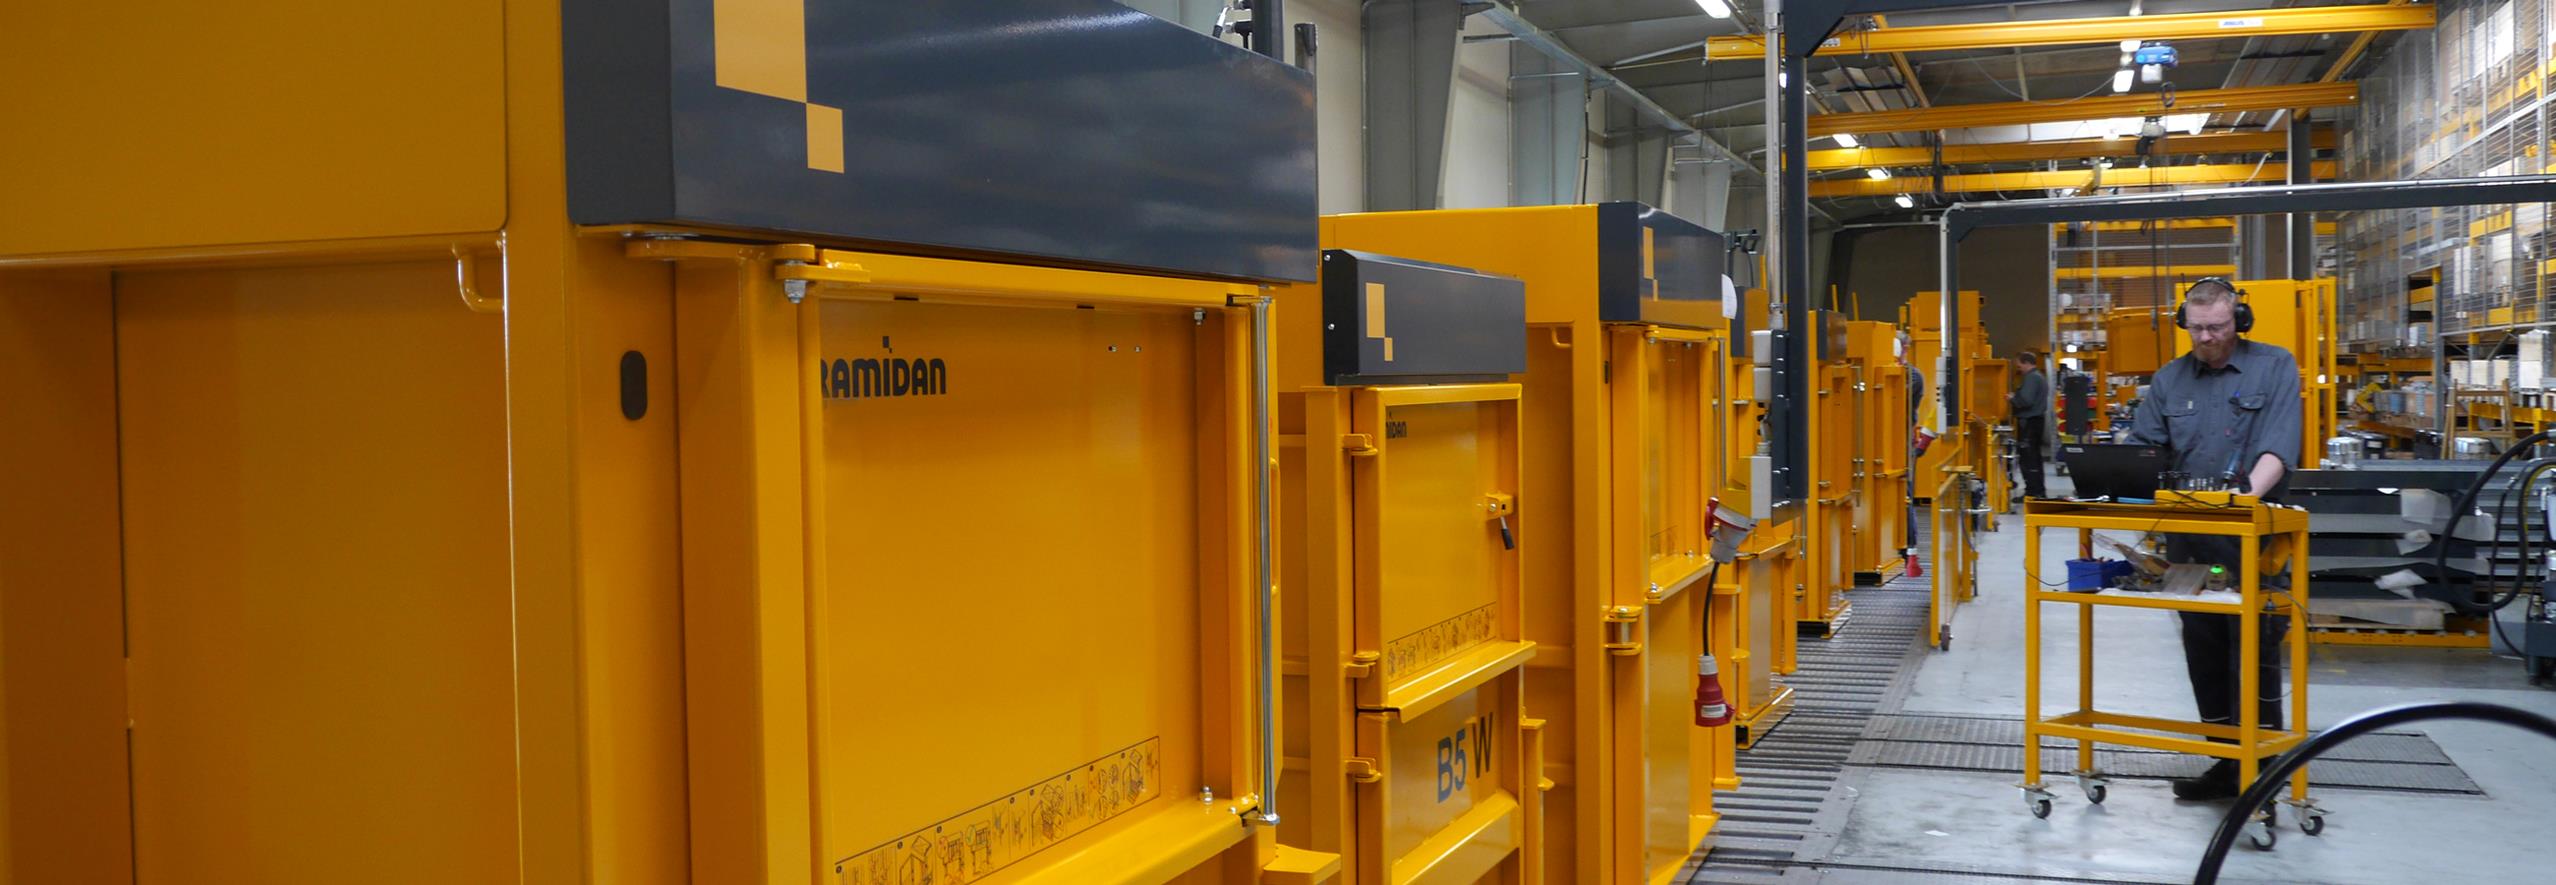 Production line filled with yellow balers and man with earmuffs